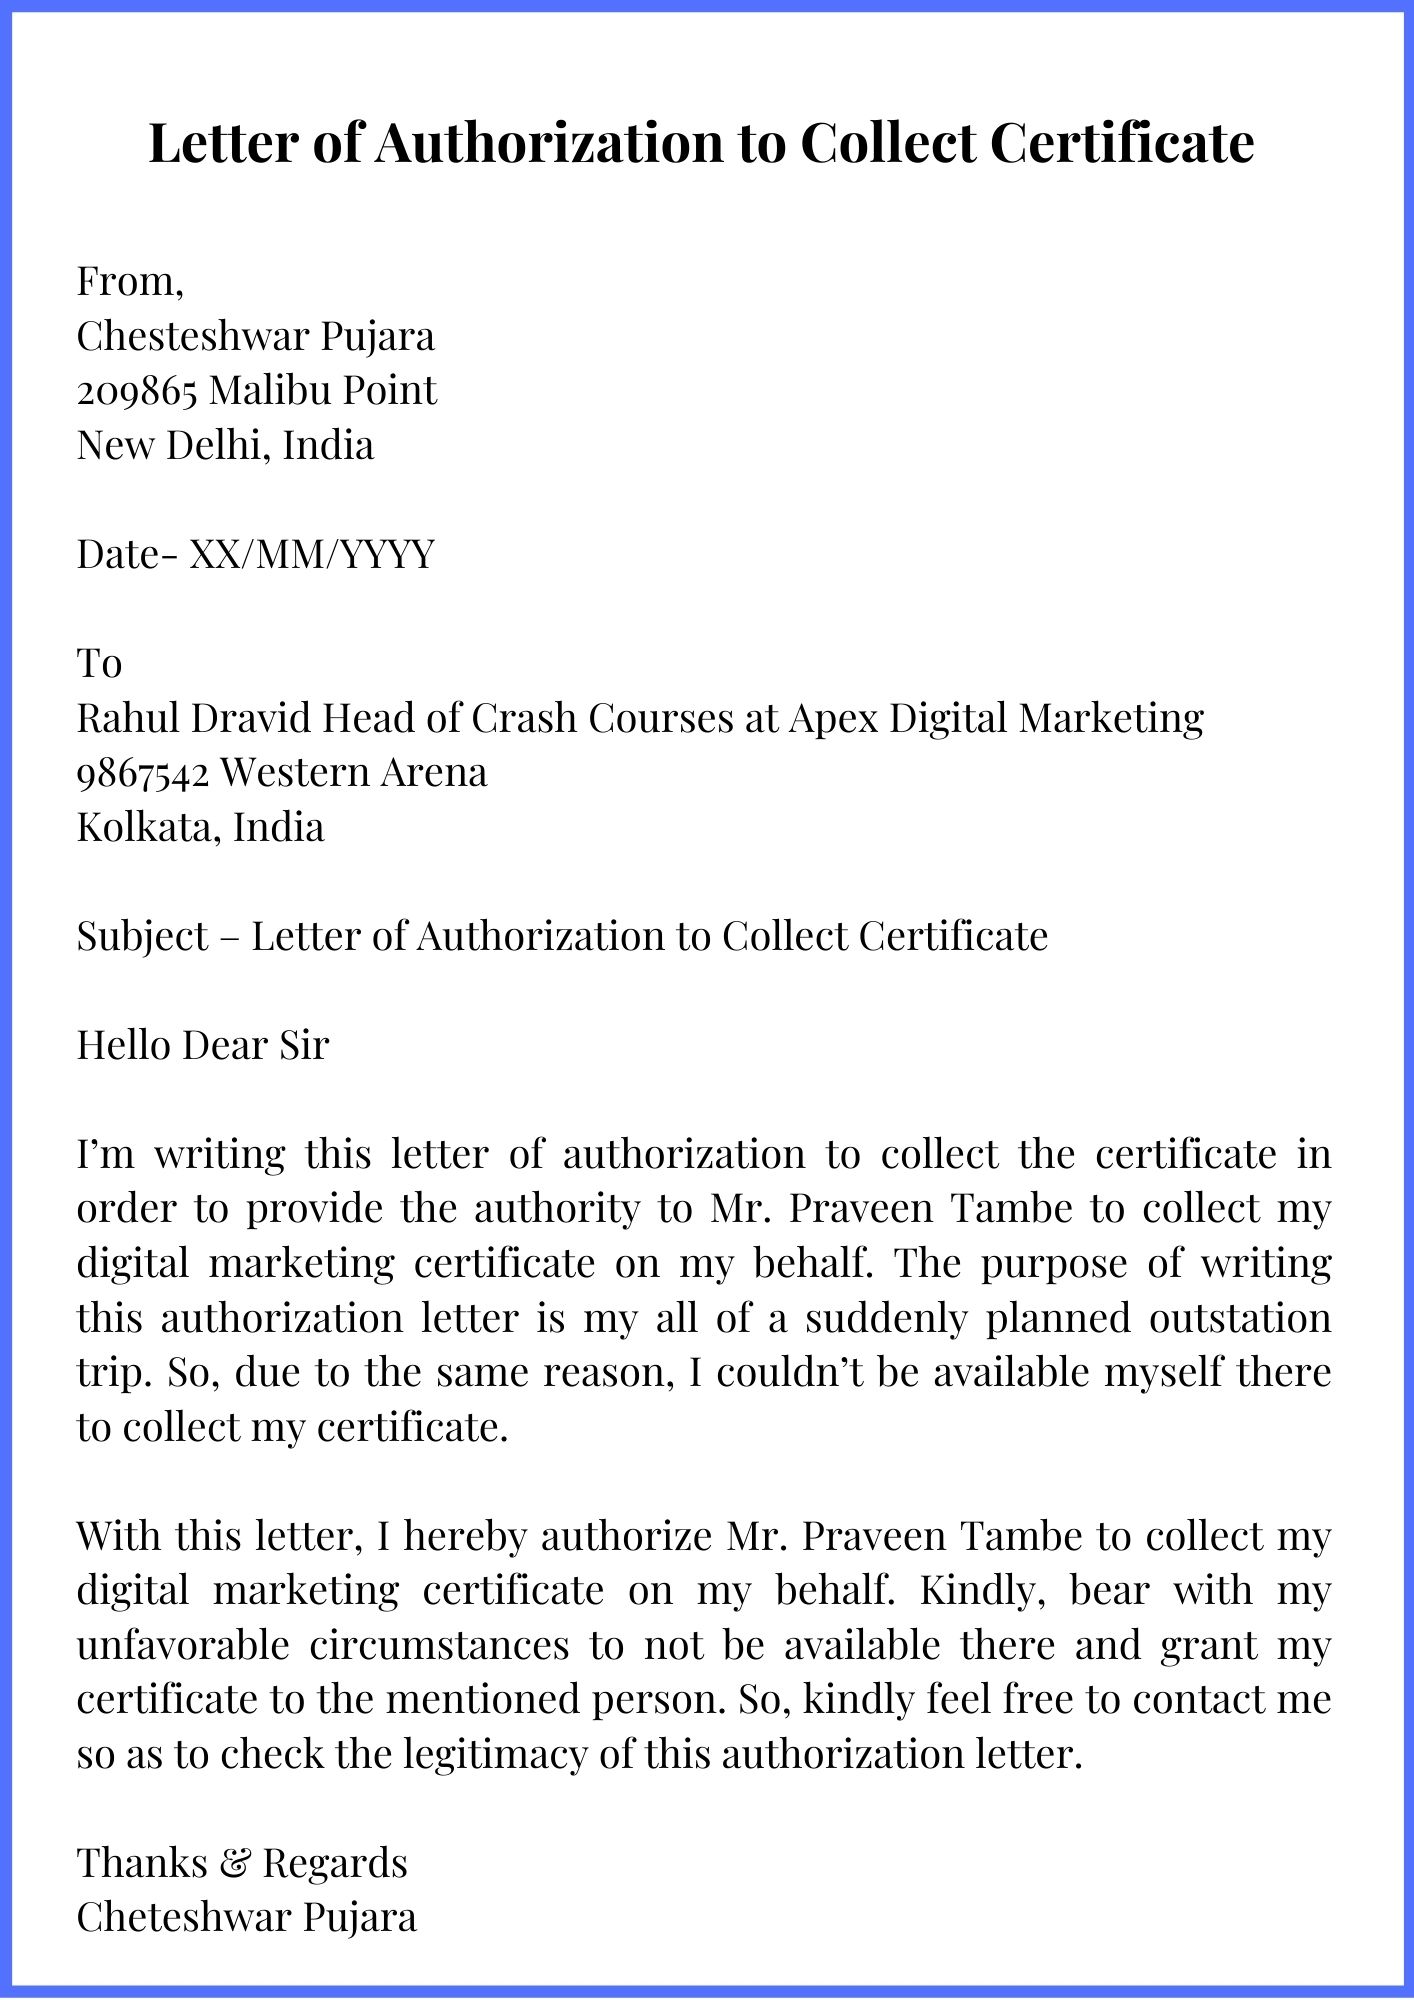 how to write an application letter to collect a certificate